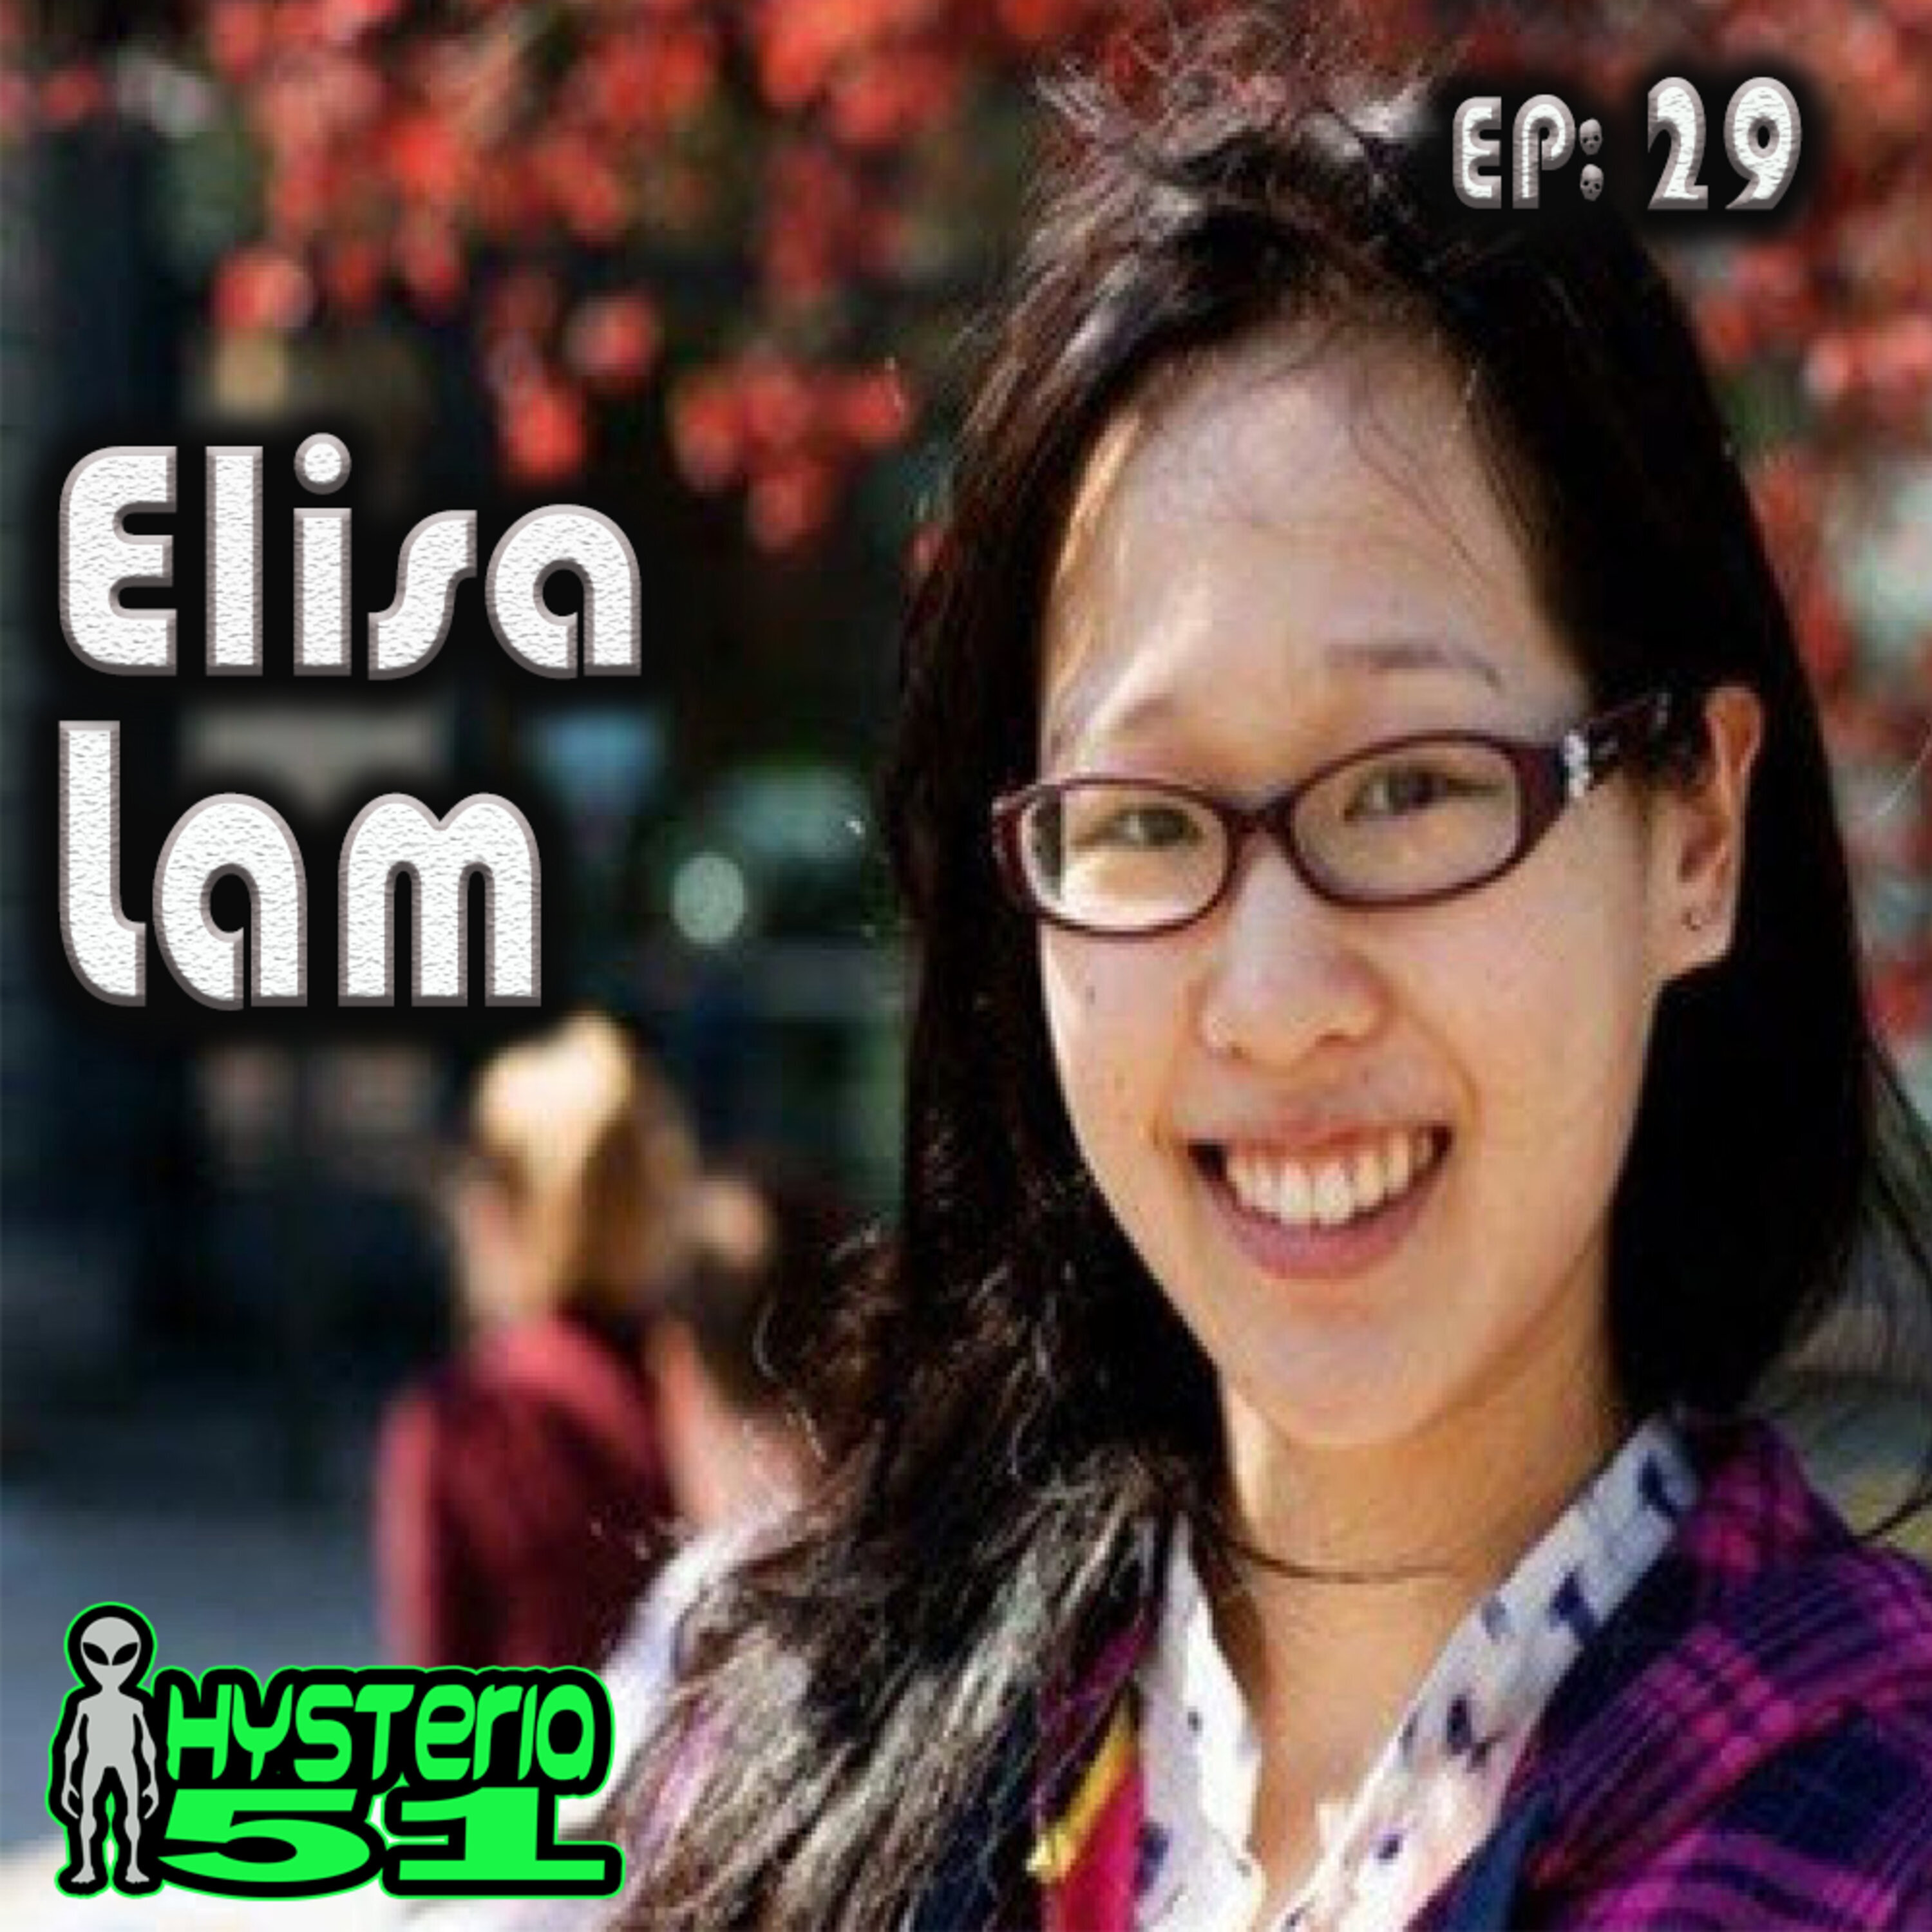 The Mysterious Death of Elisa Lam | 29 Image